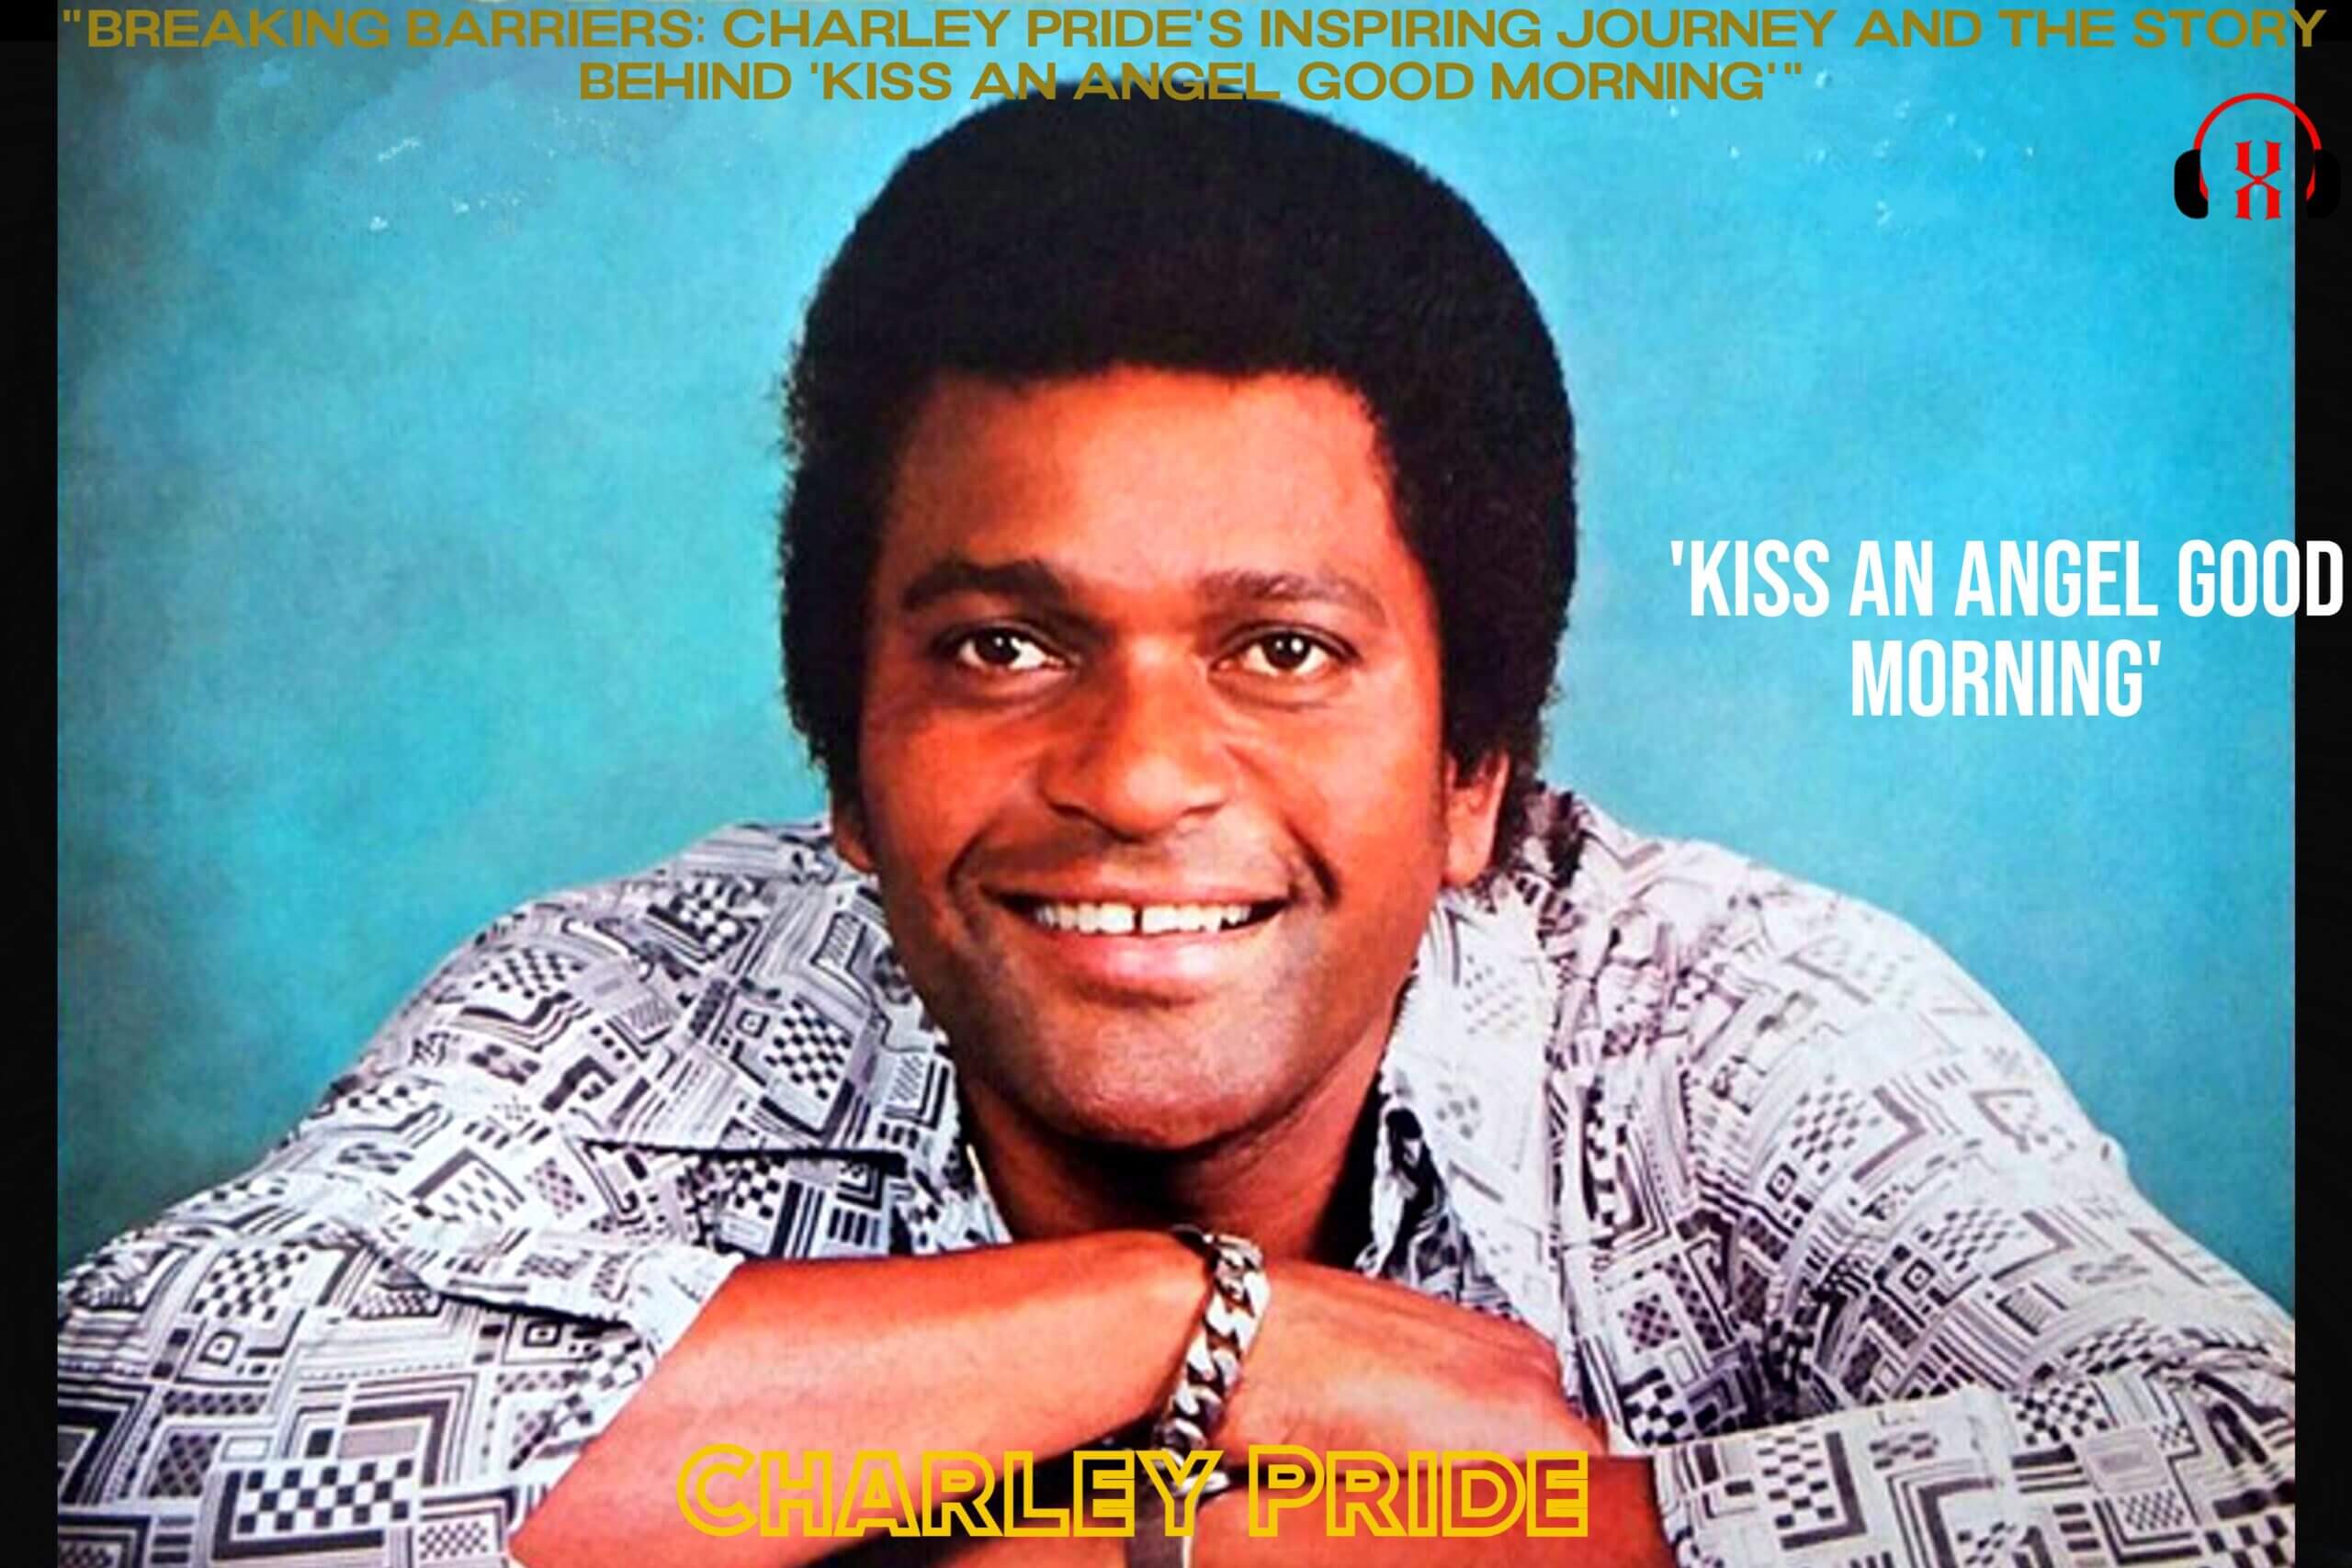 Charley Pride's Inspiring Journey and the Story Behind 'Kiss An Angel Good Morning'"